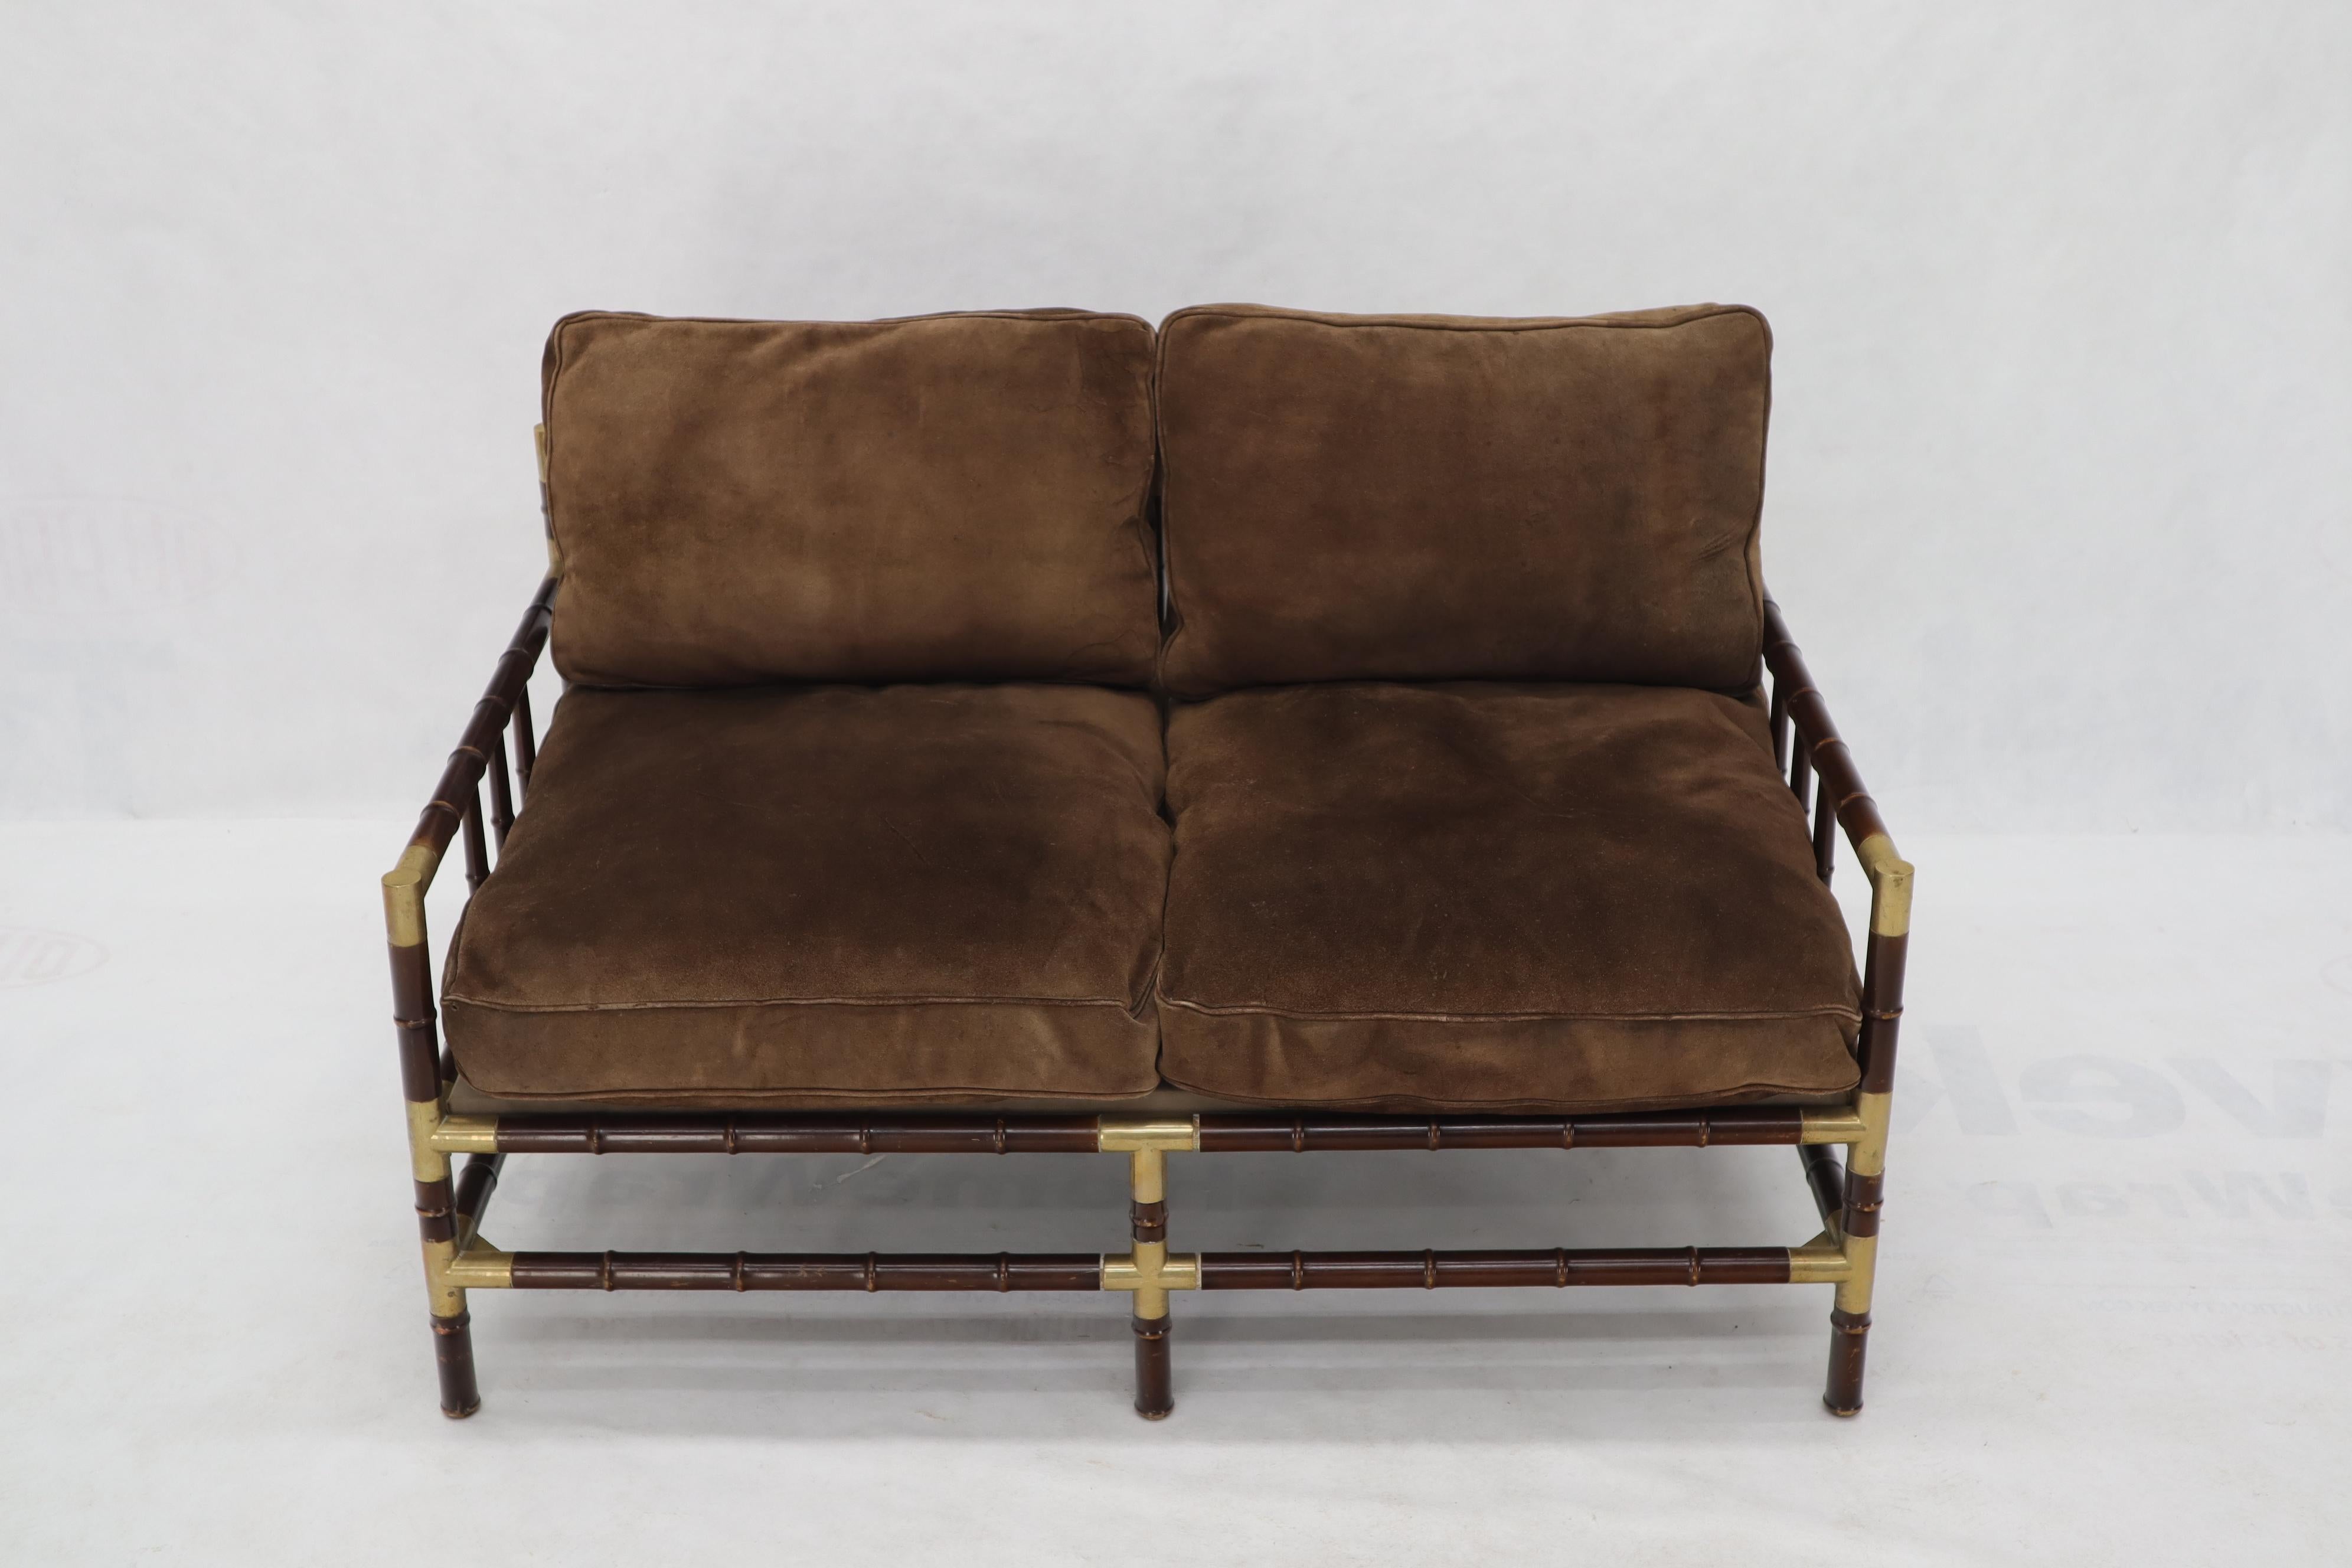 20th Century Brown Suede Upholstery Faux Bamboo Italian Mid-Century Modern Settee Loveseat For Sale